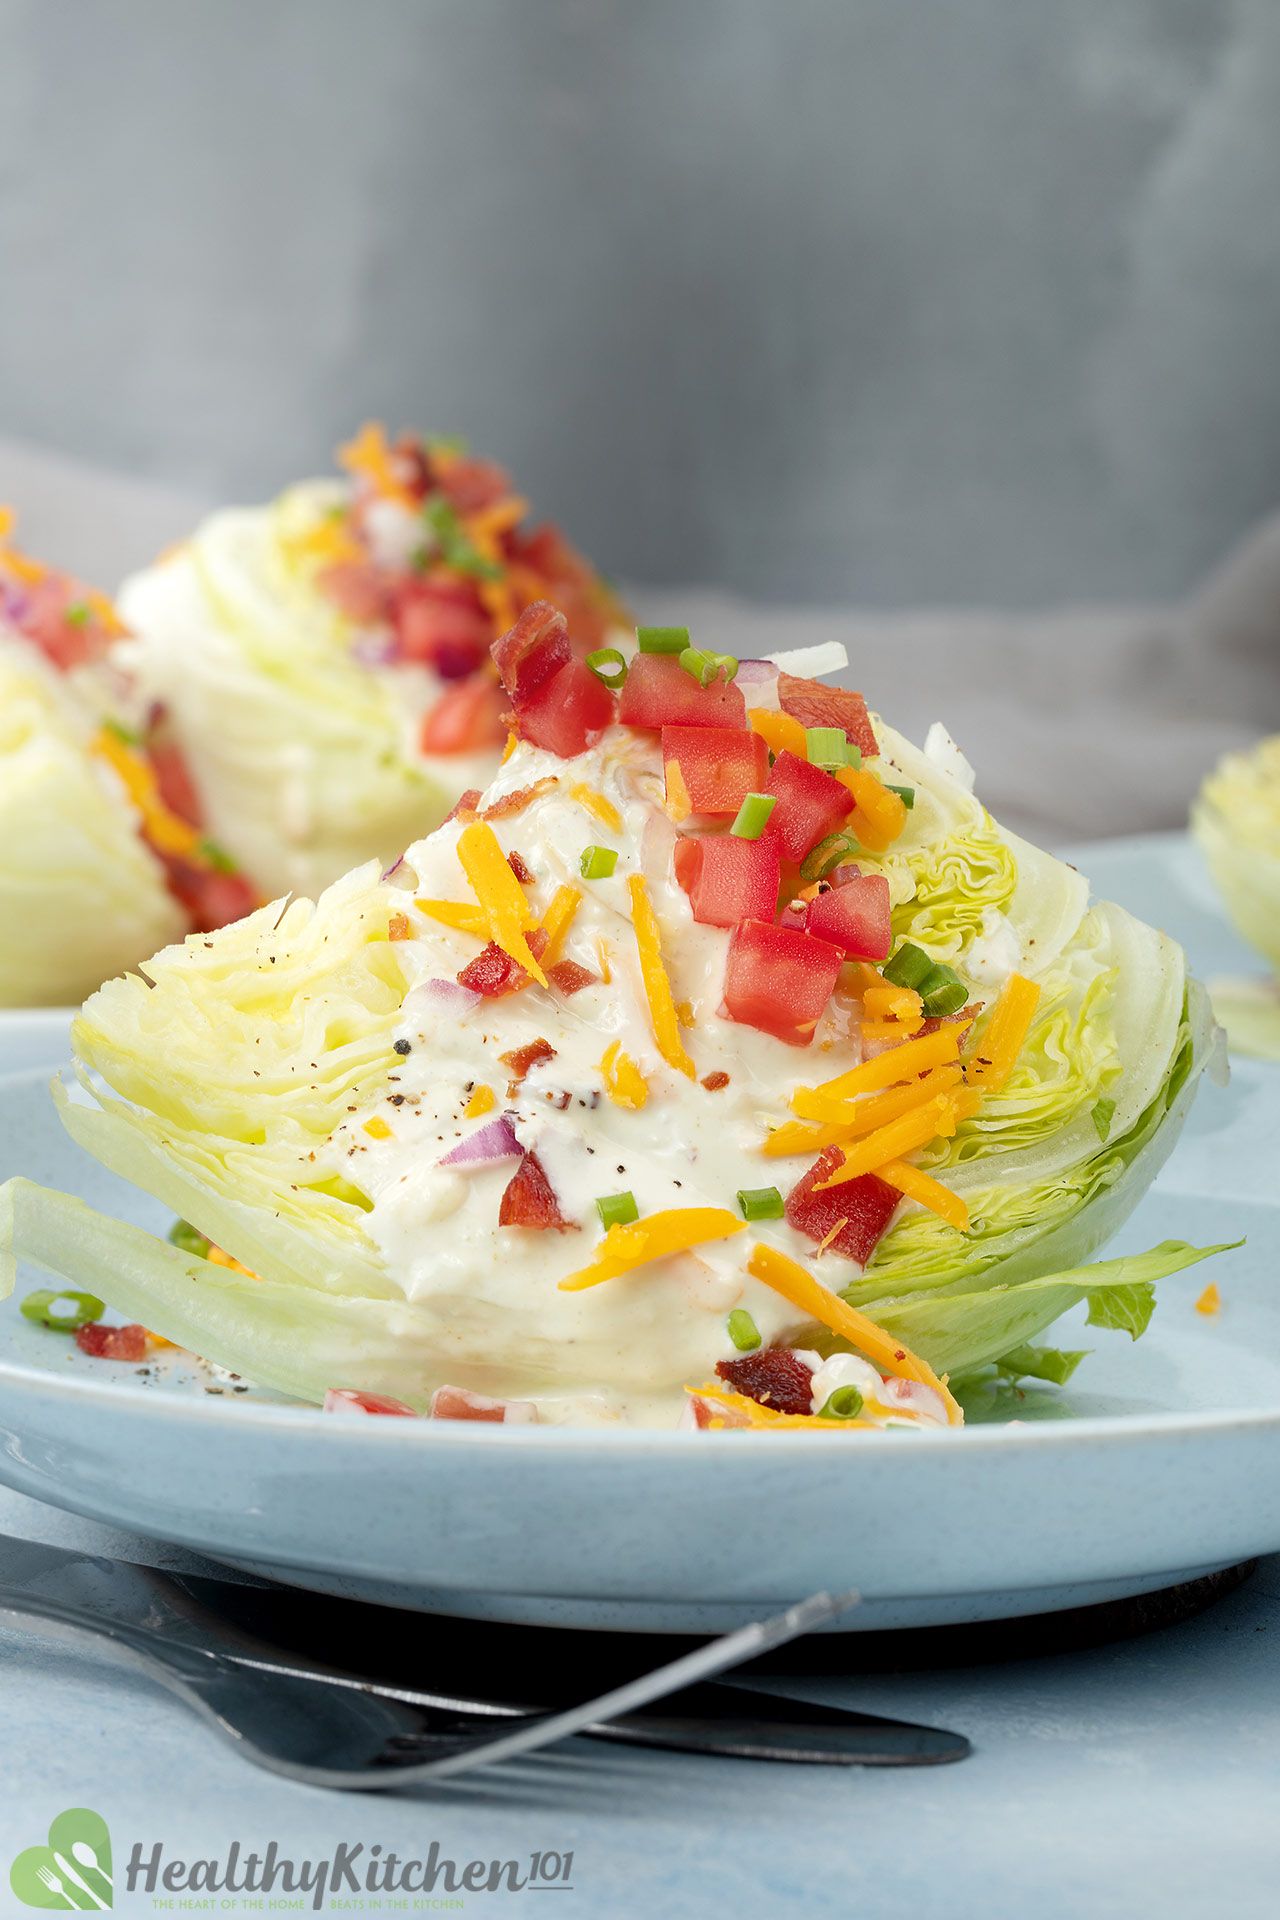 How Long Does Wedge Salad Last